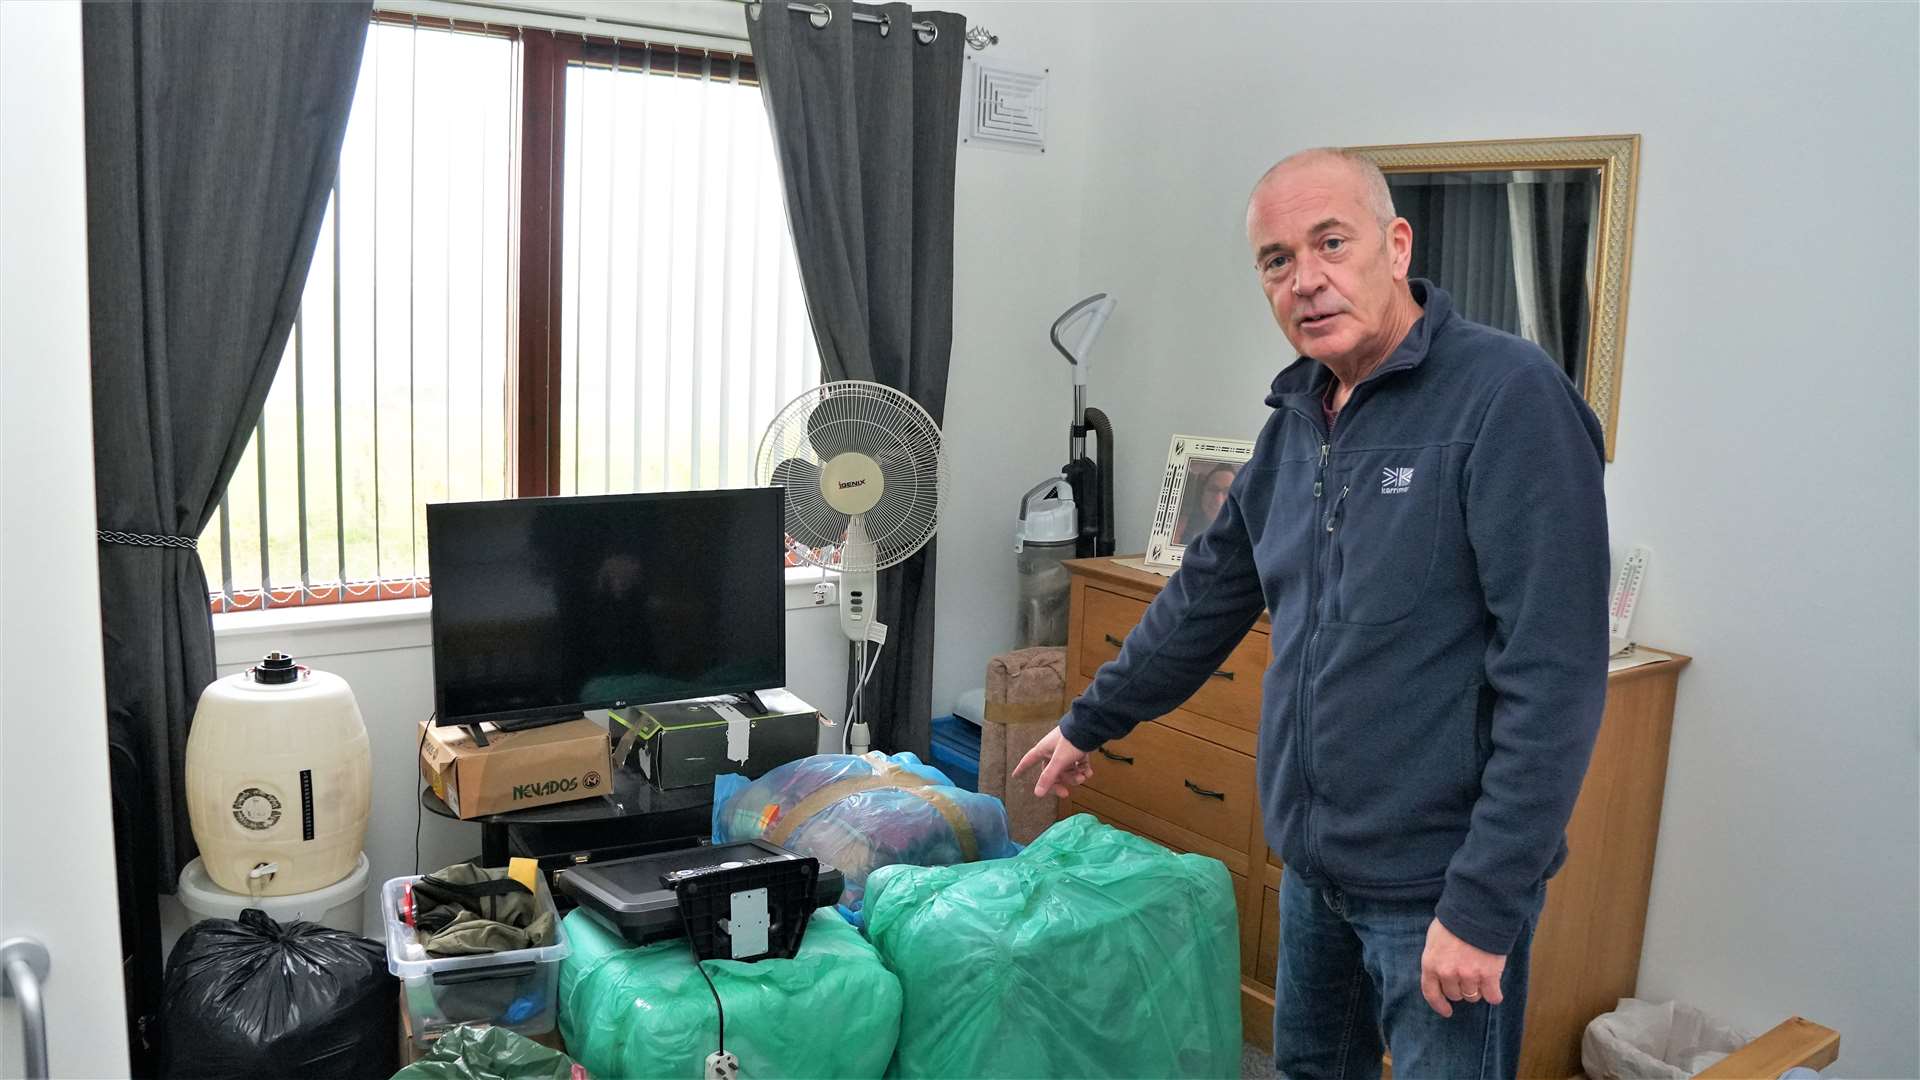 Bob Wright has taken the council to task over a dampness issue in his supported house at Lybster. He showed how he has to wrap many of his items in plastic to keep the damp smell away. Picture: DGS